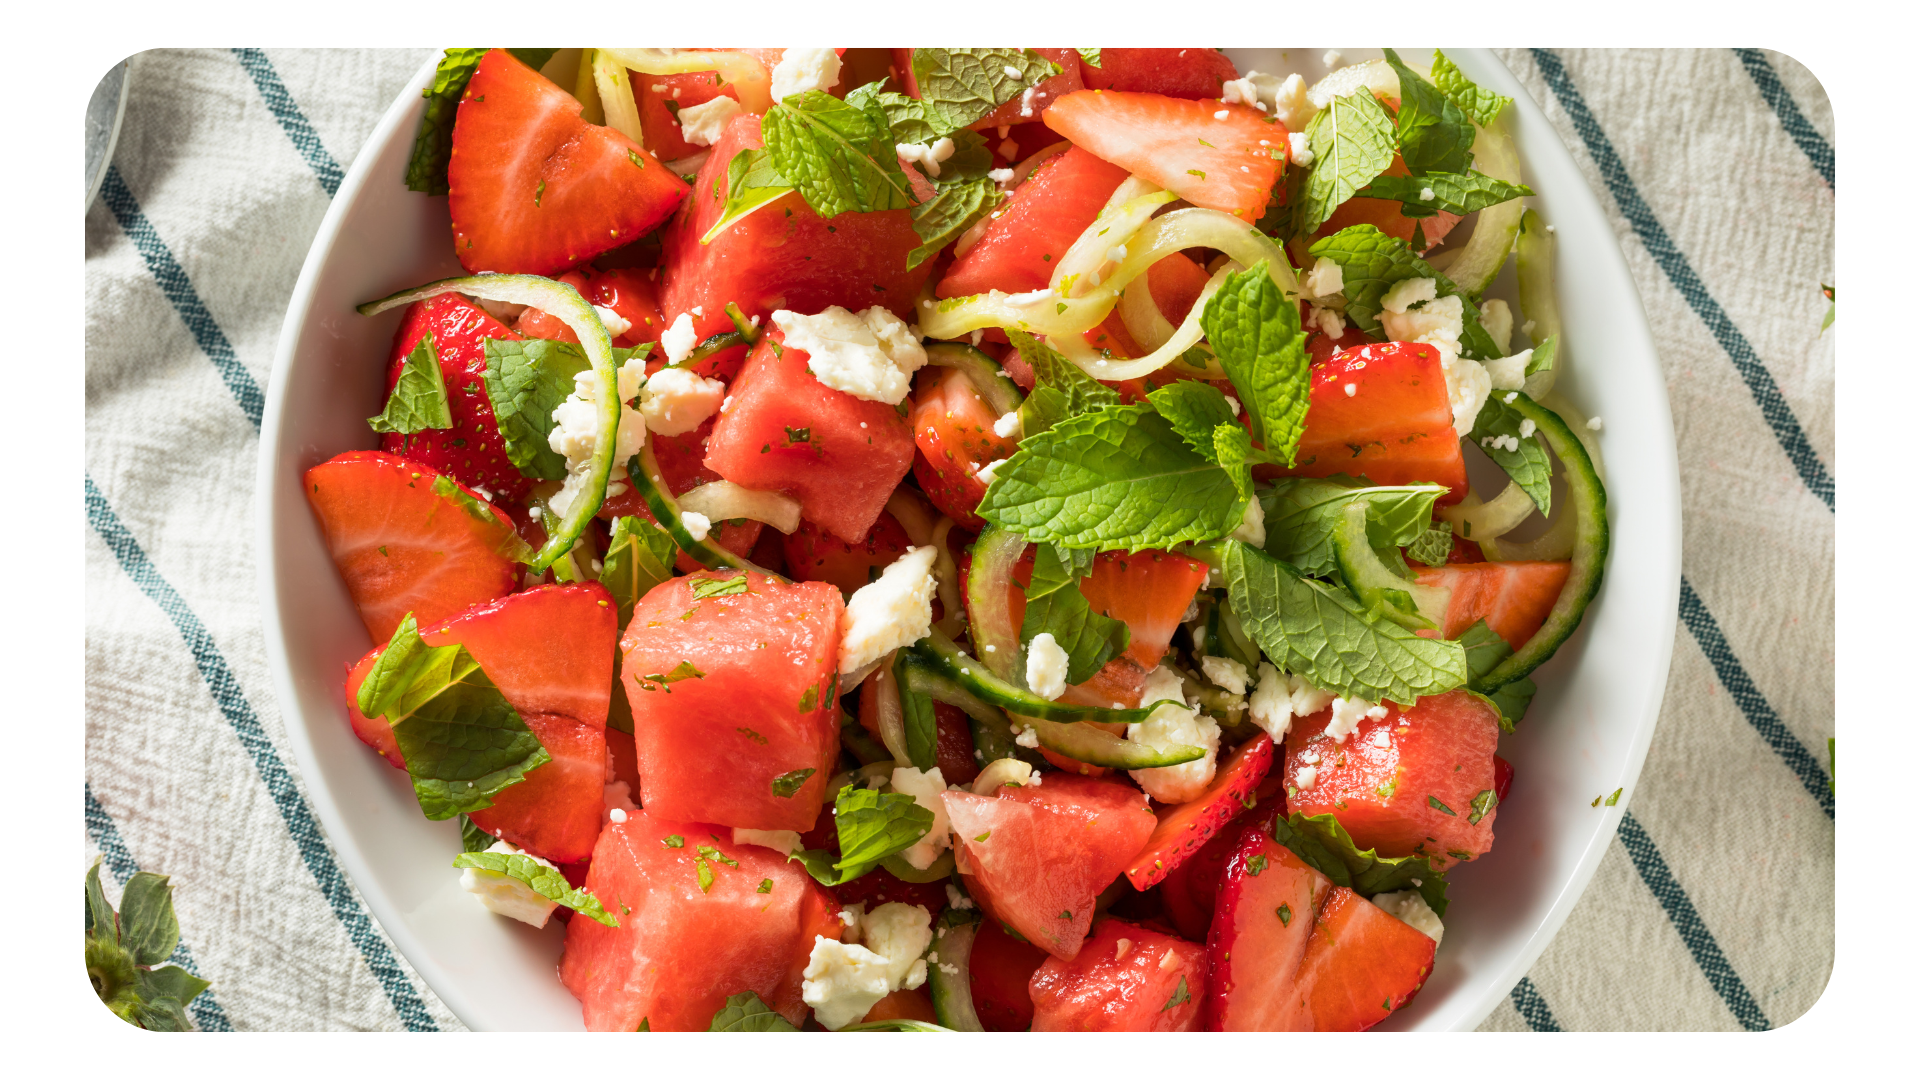 Watermelon and Passionfruit Salad with Purslane, Mexican Mint, and Armenian Cucumbers